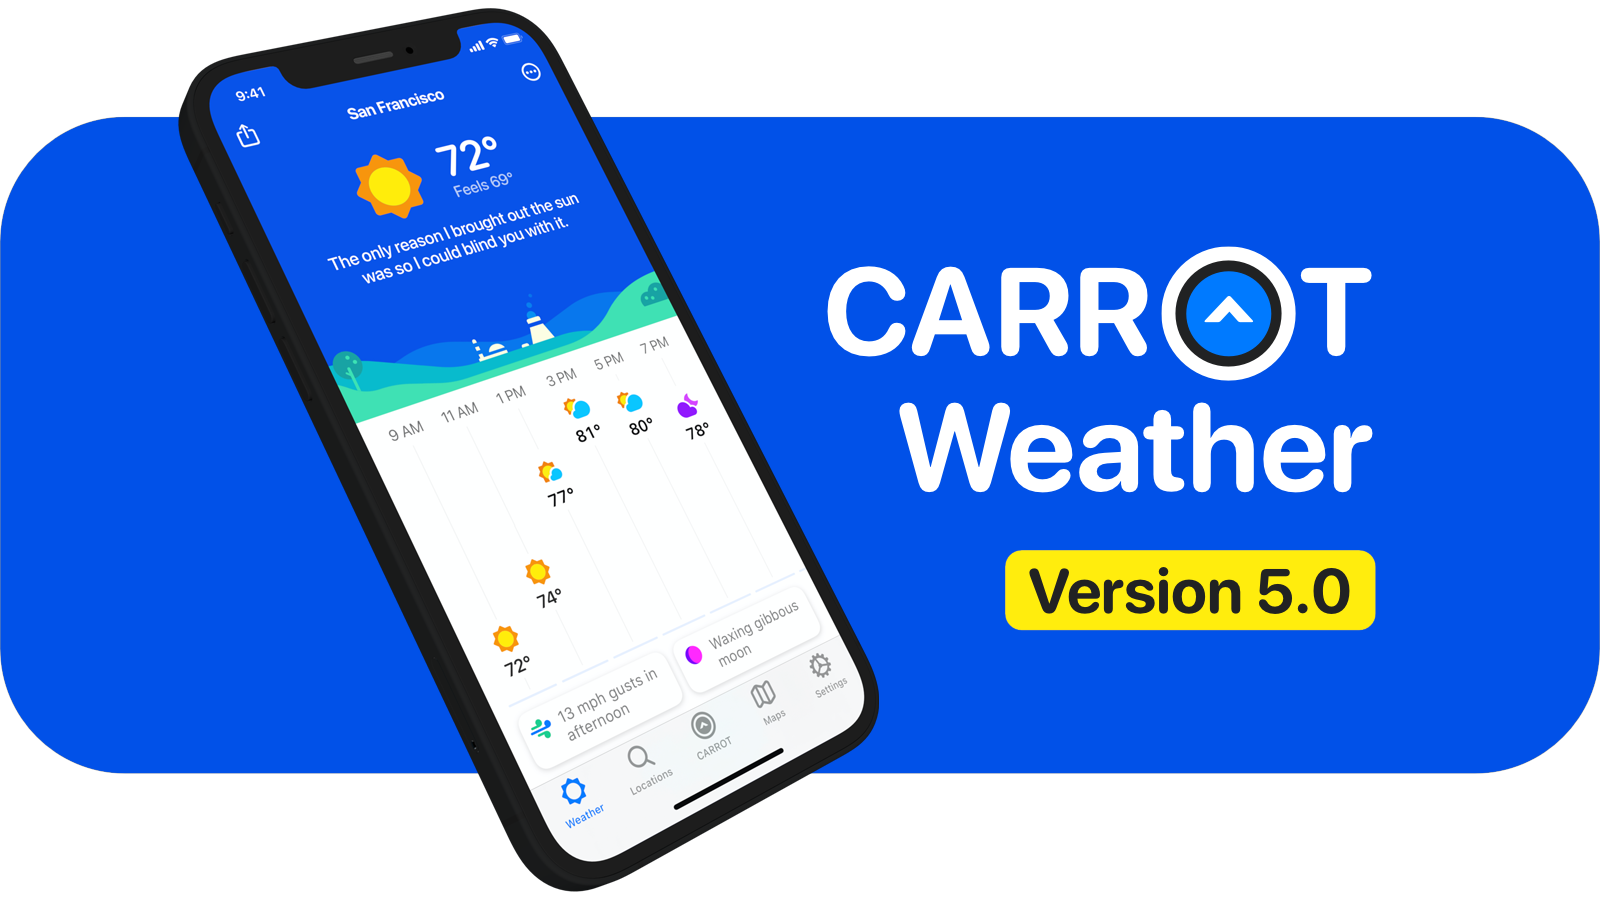 Introducing CARROT Weather v5.0